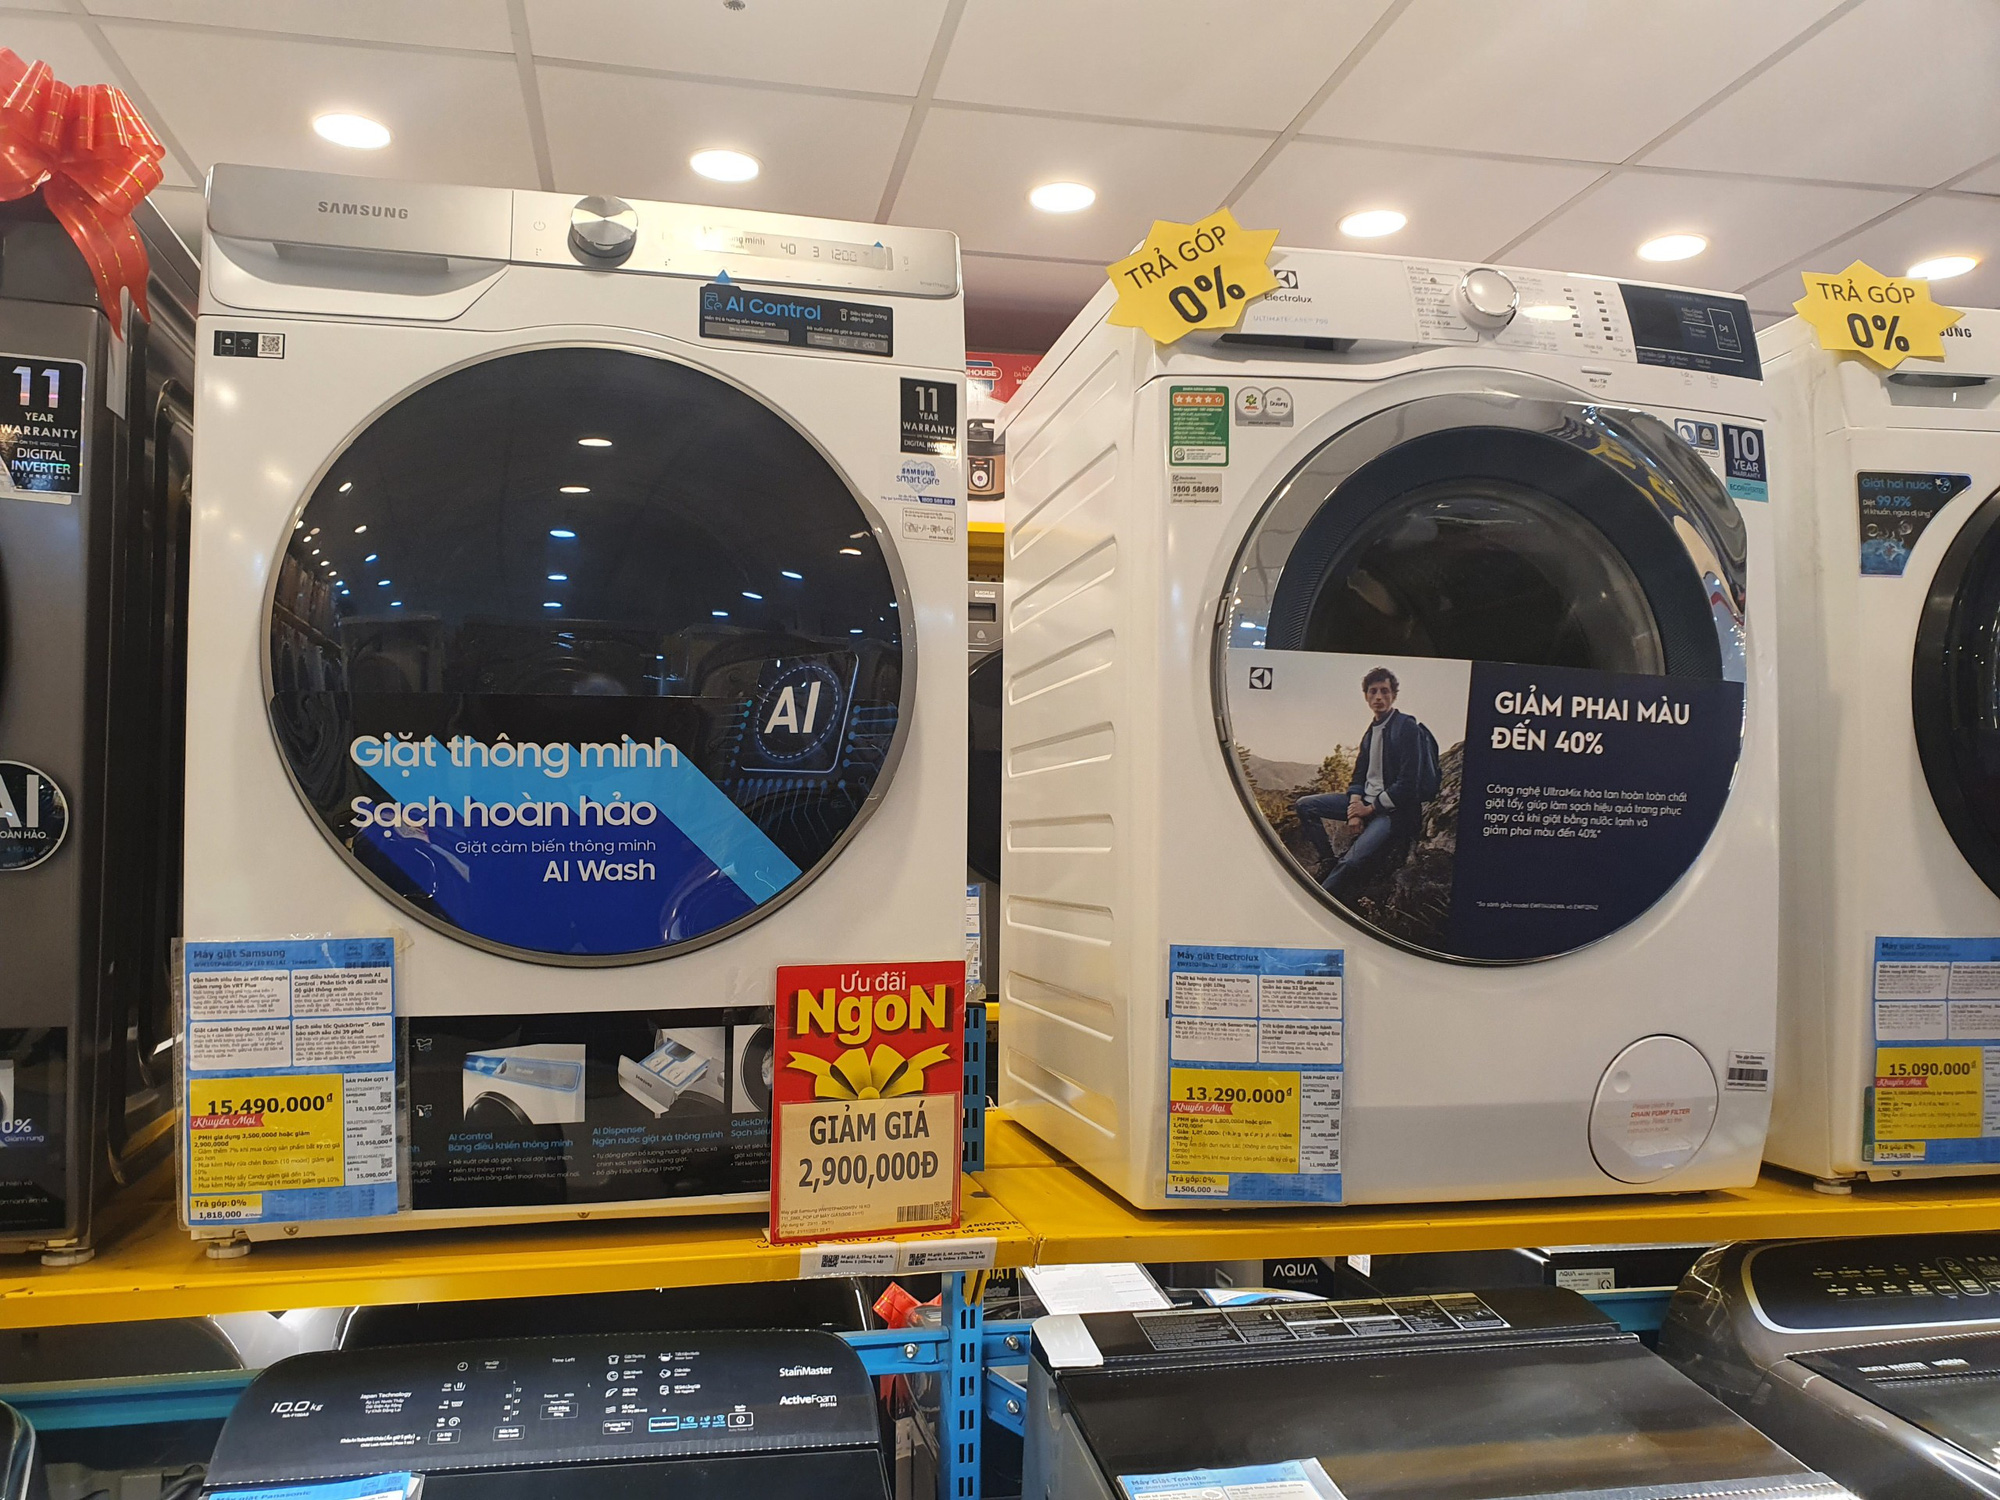 Washing machines at the same time deeply discounted up to 50% - Photo 3.